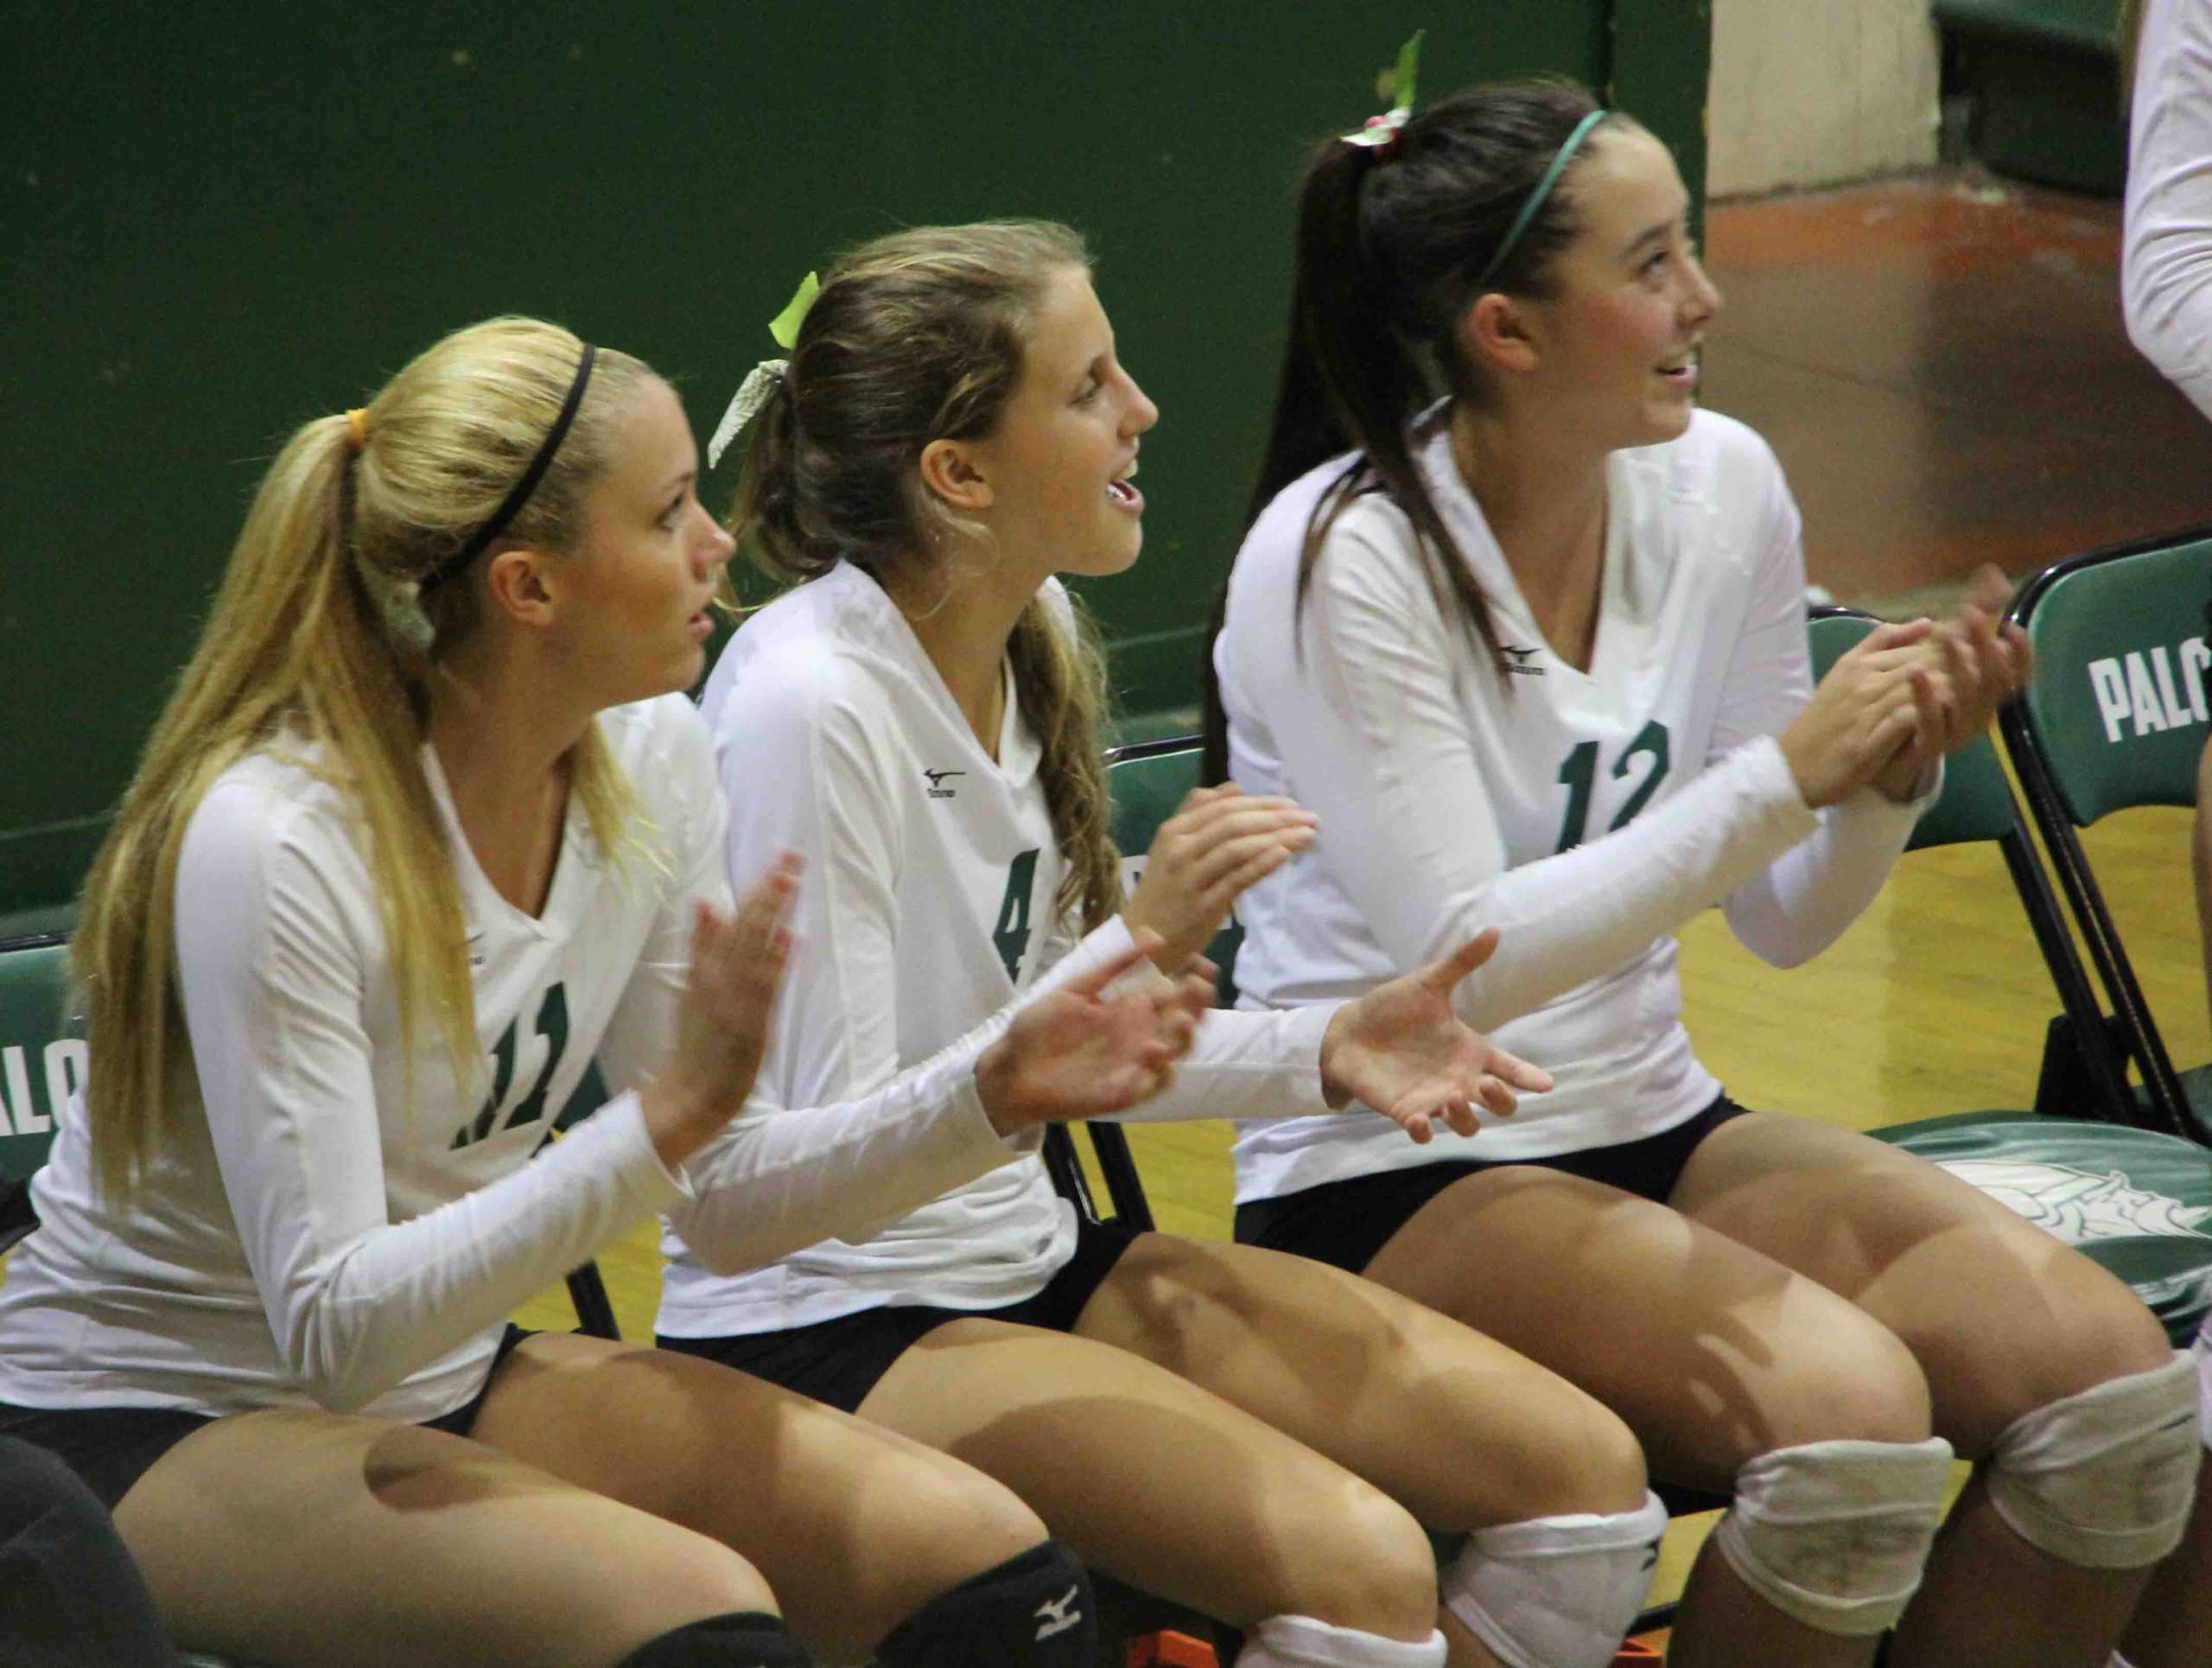 From left: senior Lauren Kerr and juniors Courtney Hartwell and Jade Schoenberger cheer for their teammates as Paly scores a point against the Kings Academy